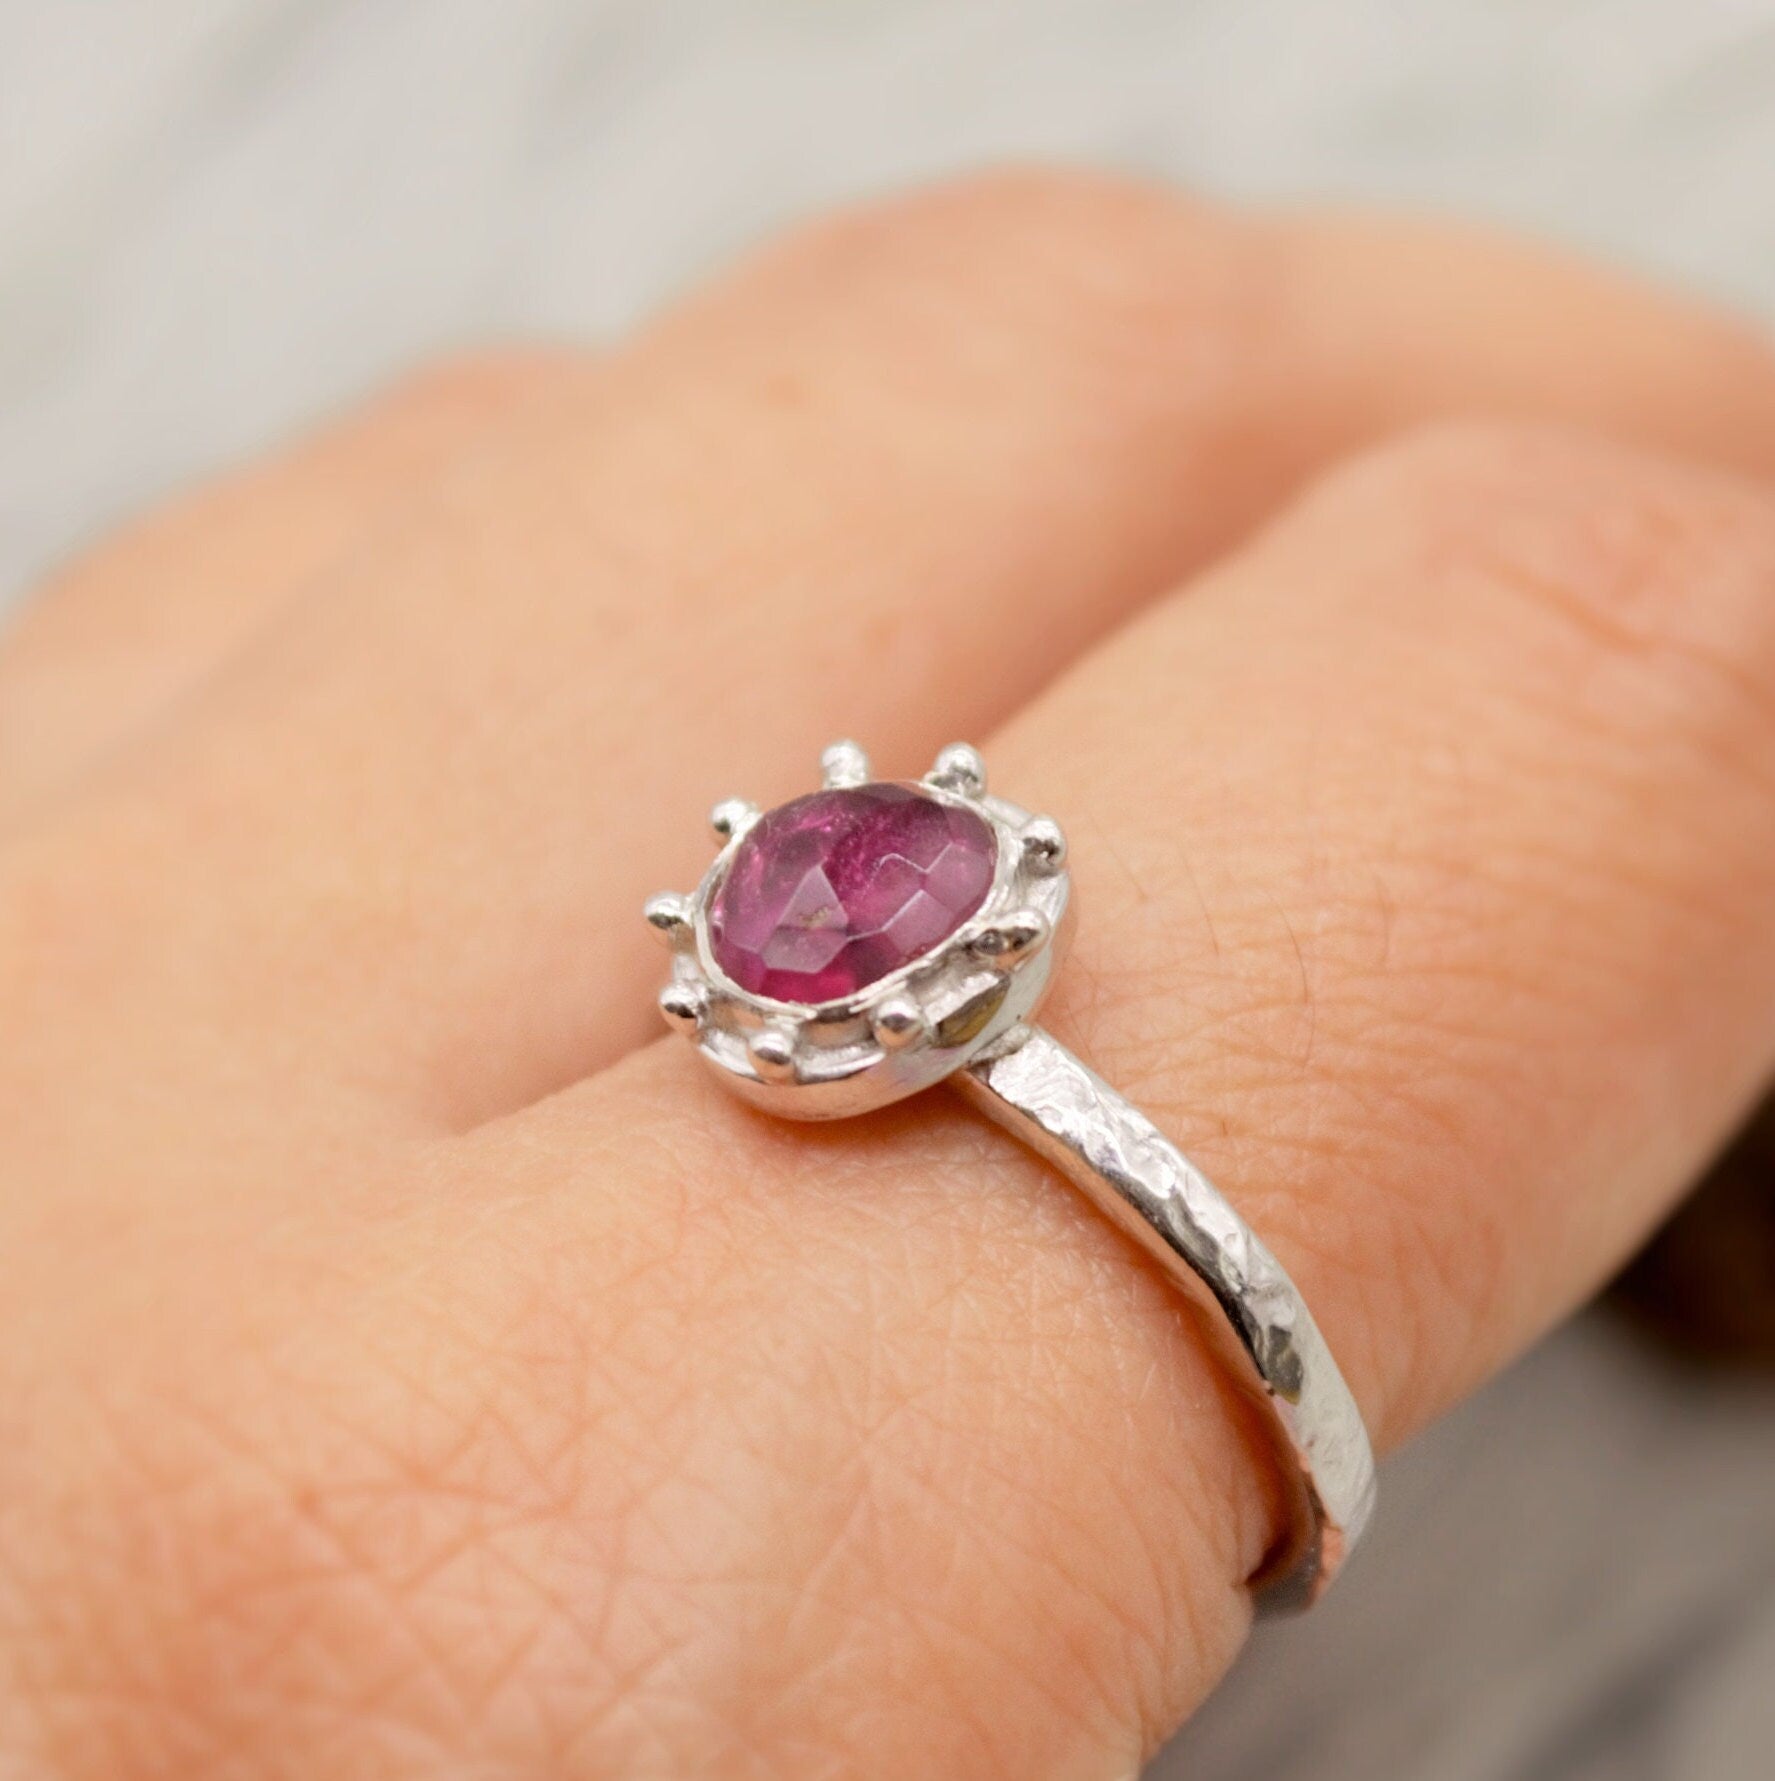 Pink Tourmaline Ring, 925 Sterling Silver Rings, Tourmaline Jewelry, October Birthstone, Gifts For Her, Rings For Women, Stackable Gemstone